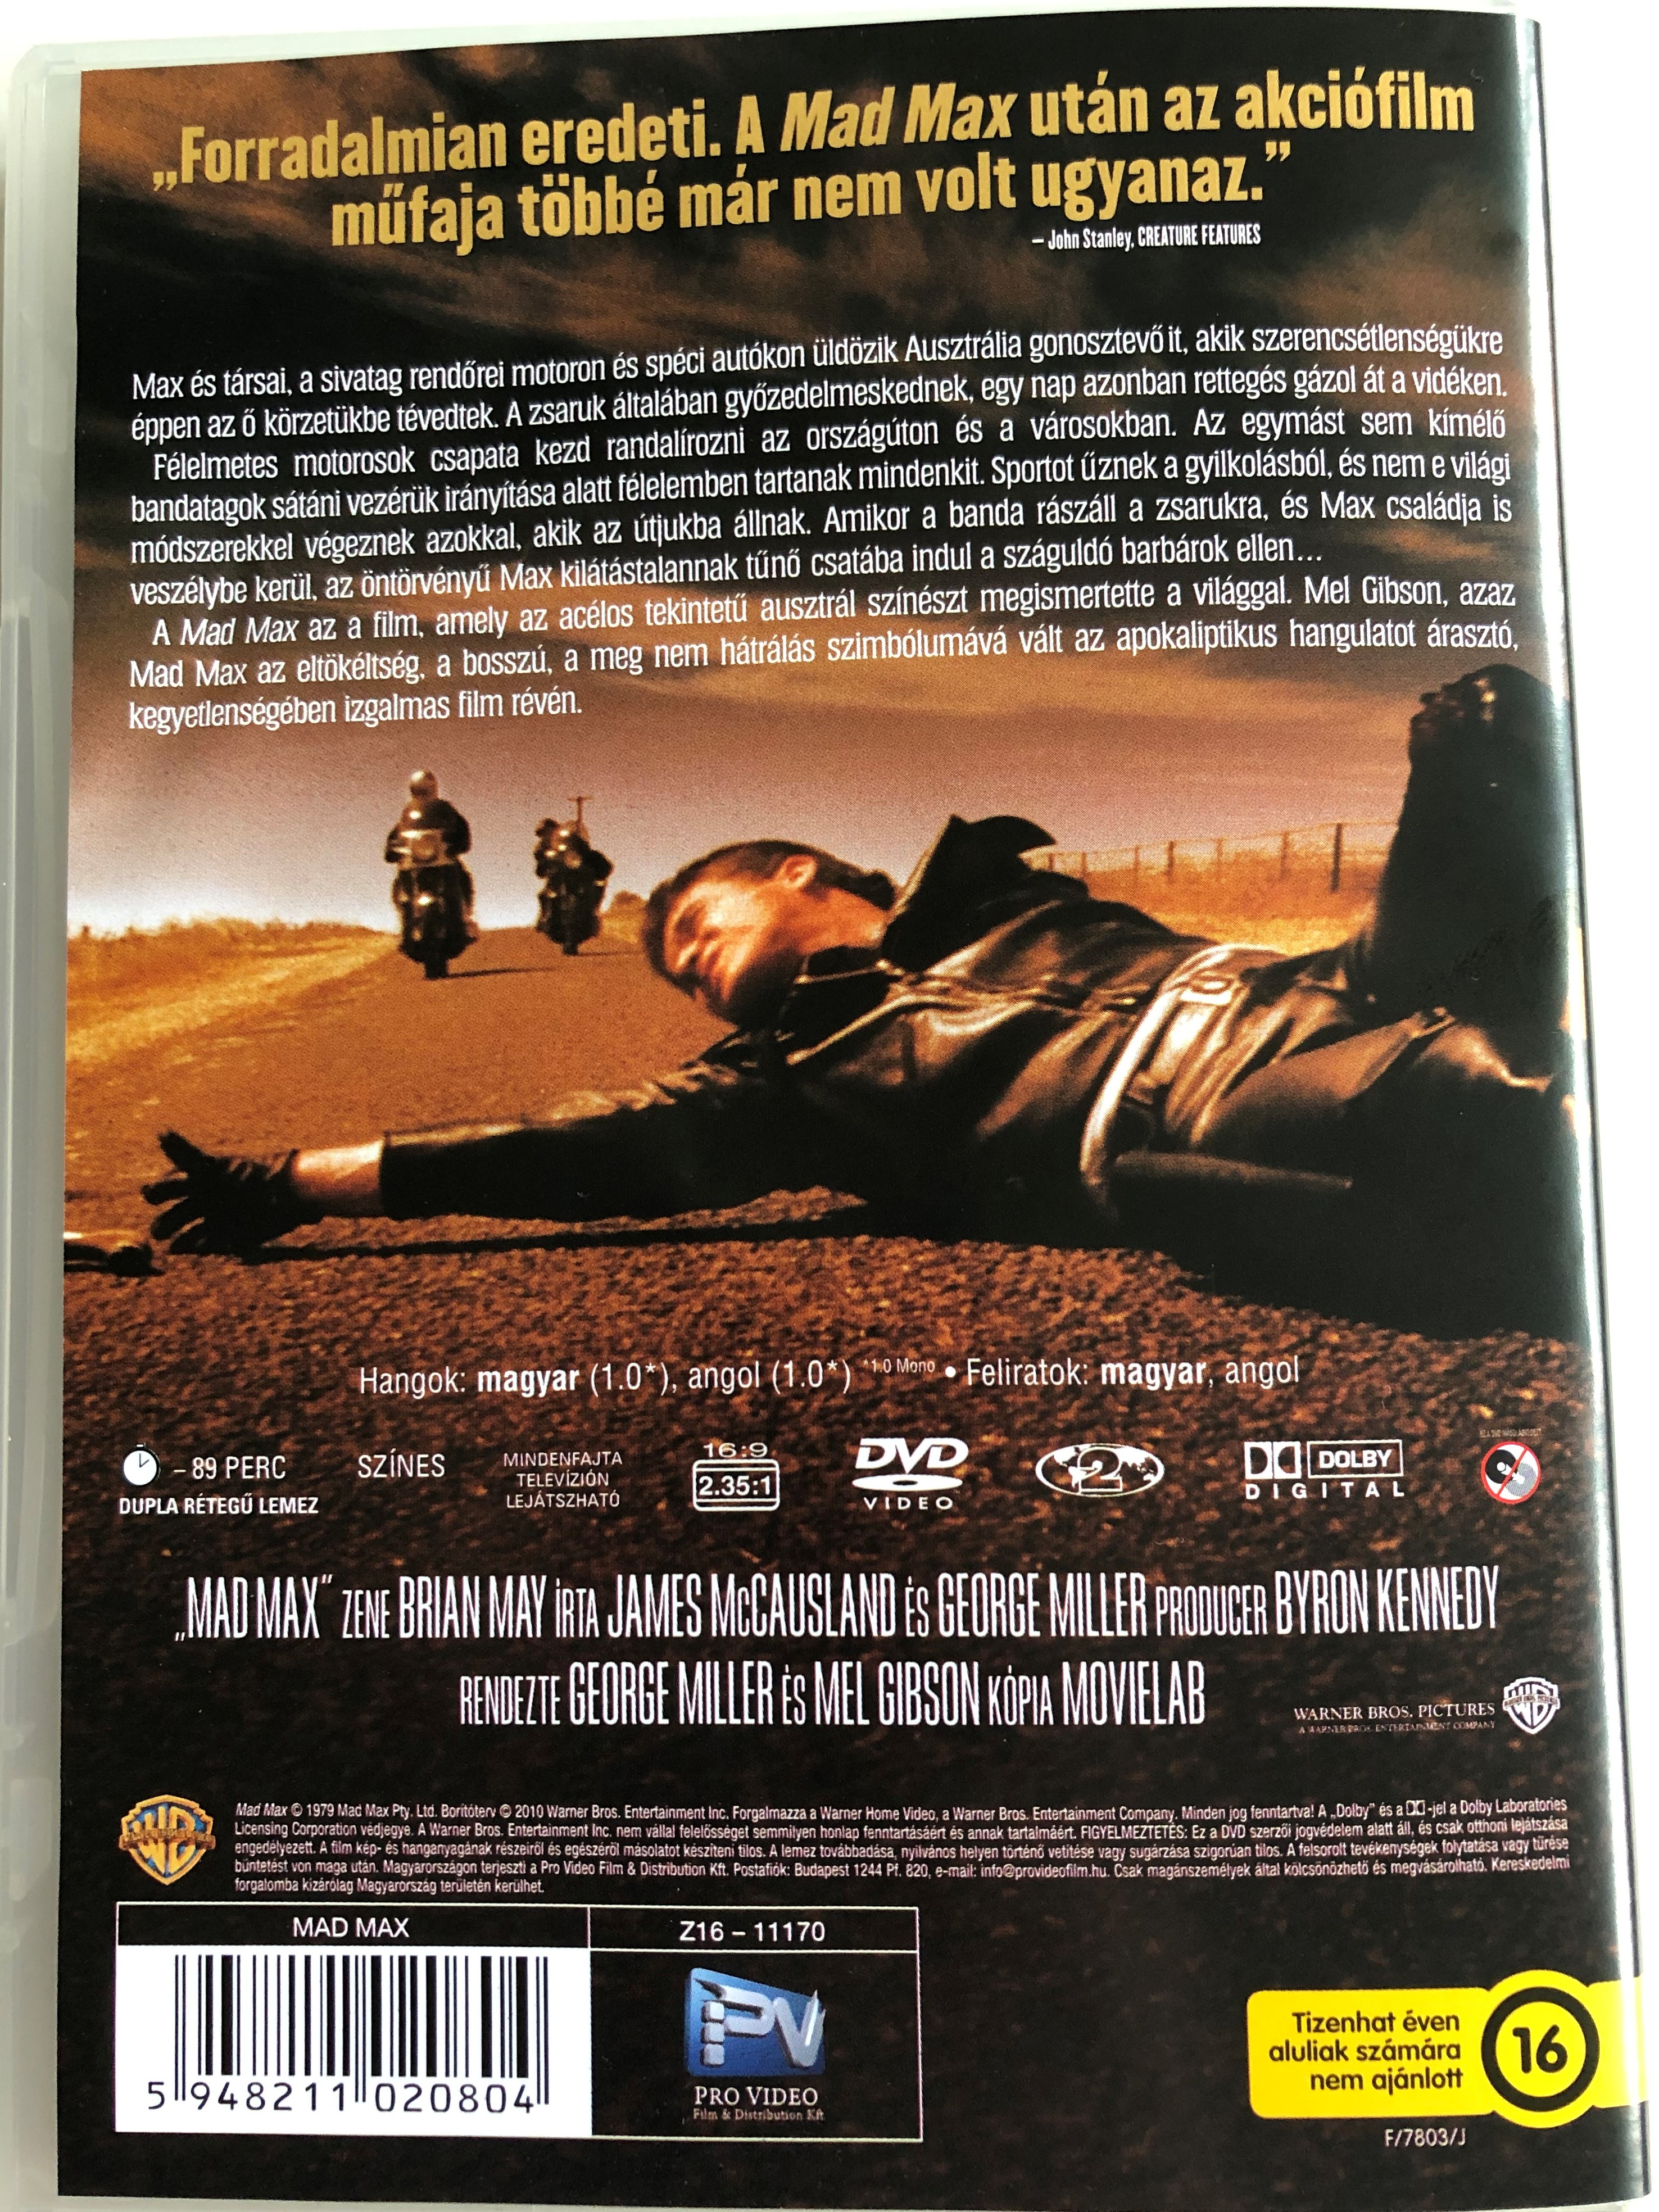 mad-max-dvd-1979-directed-by-george-miller-2.jpg